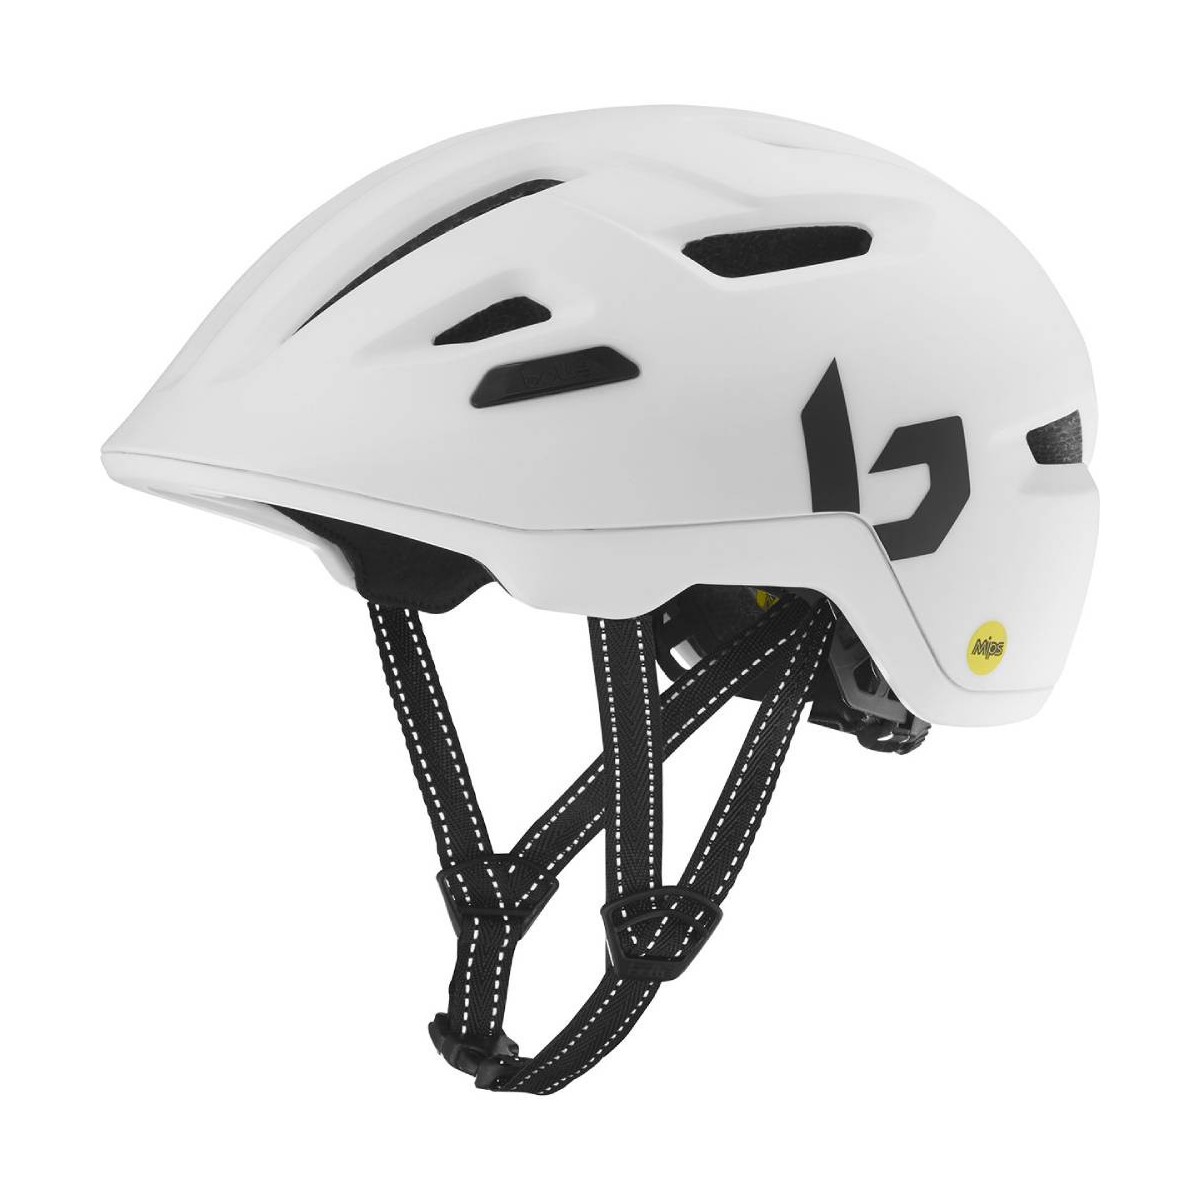 CASCO BOLLE STANCE MIPS (BLANCO MATE)